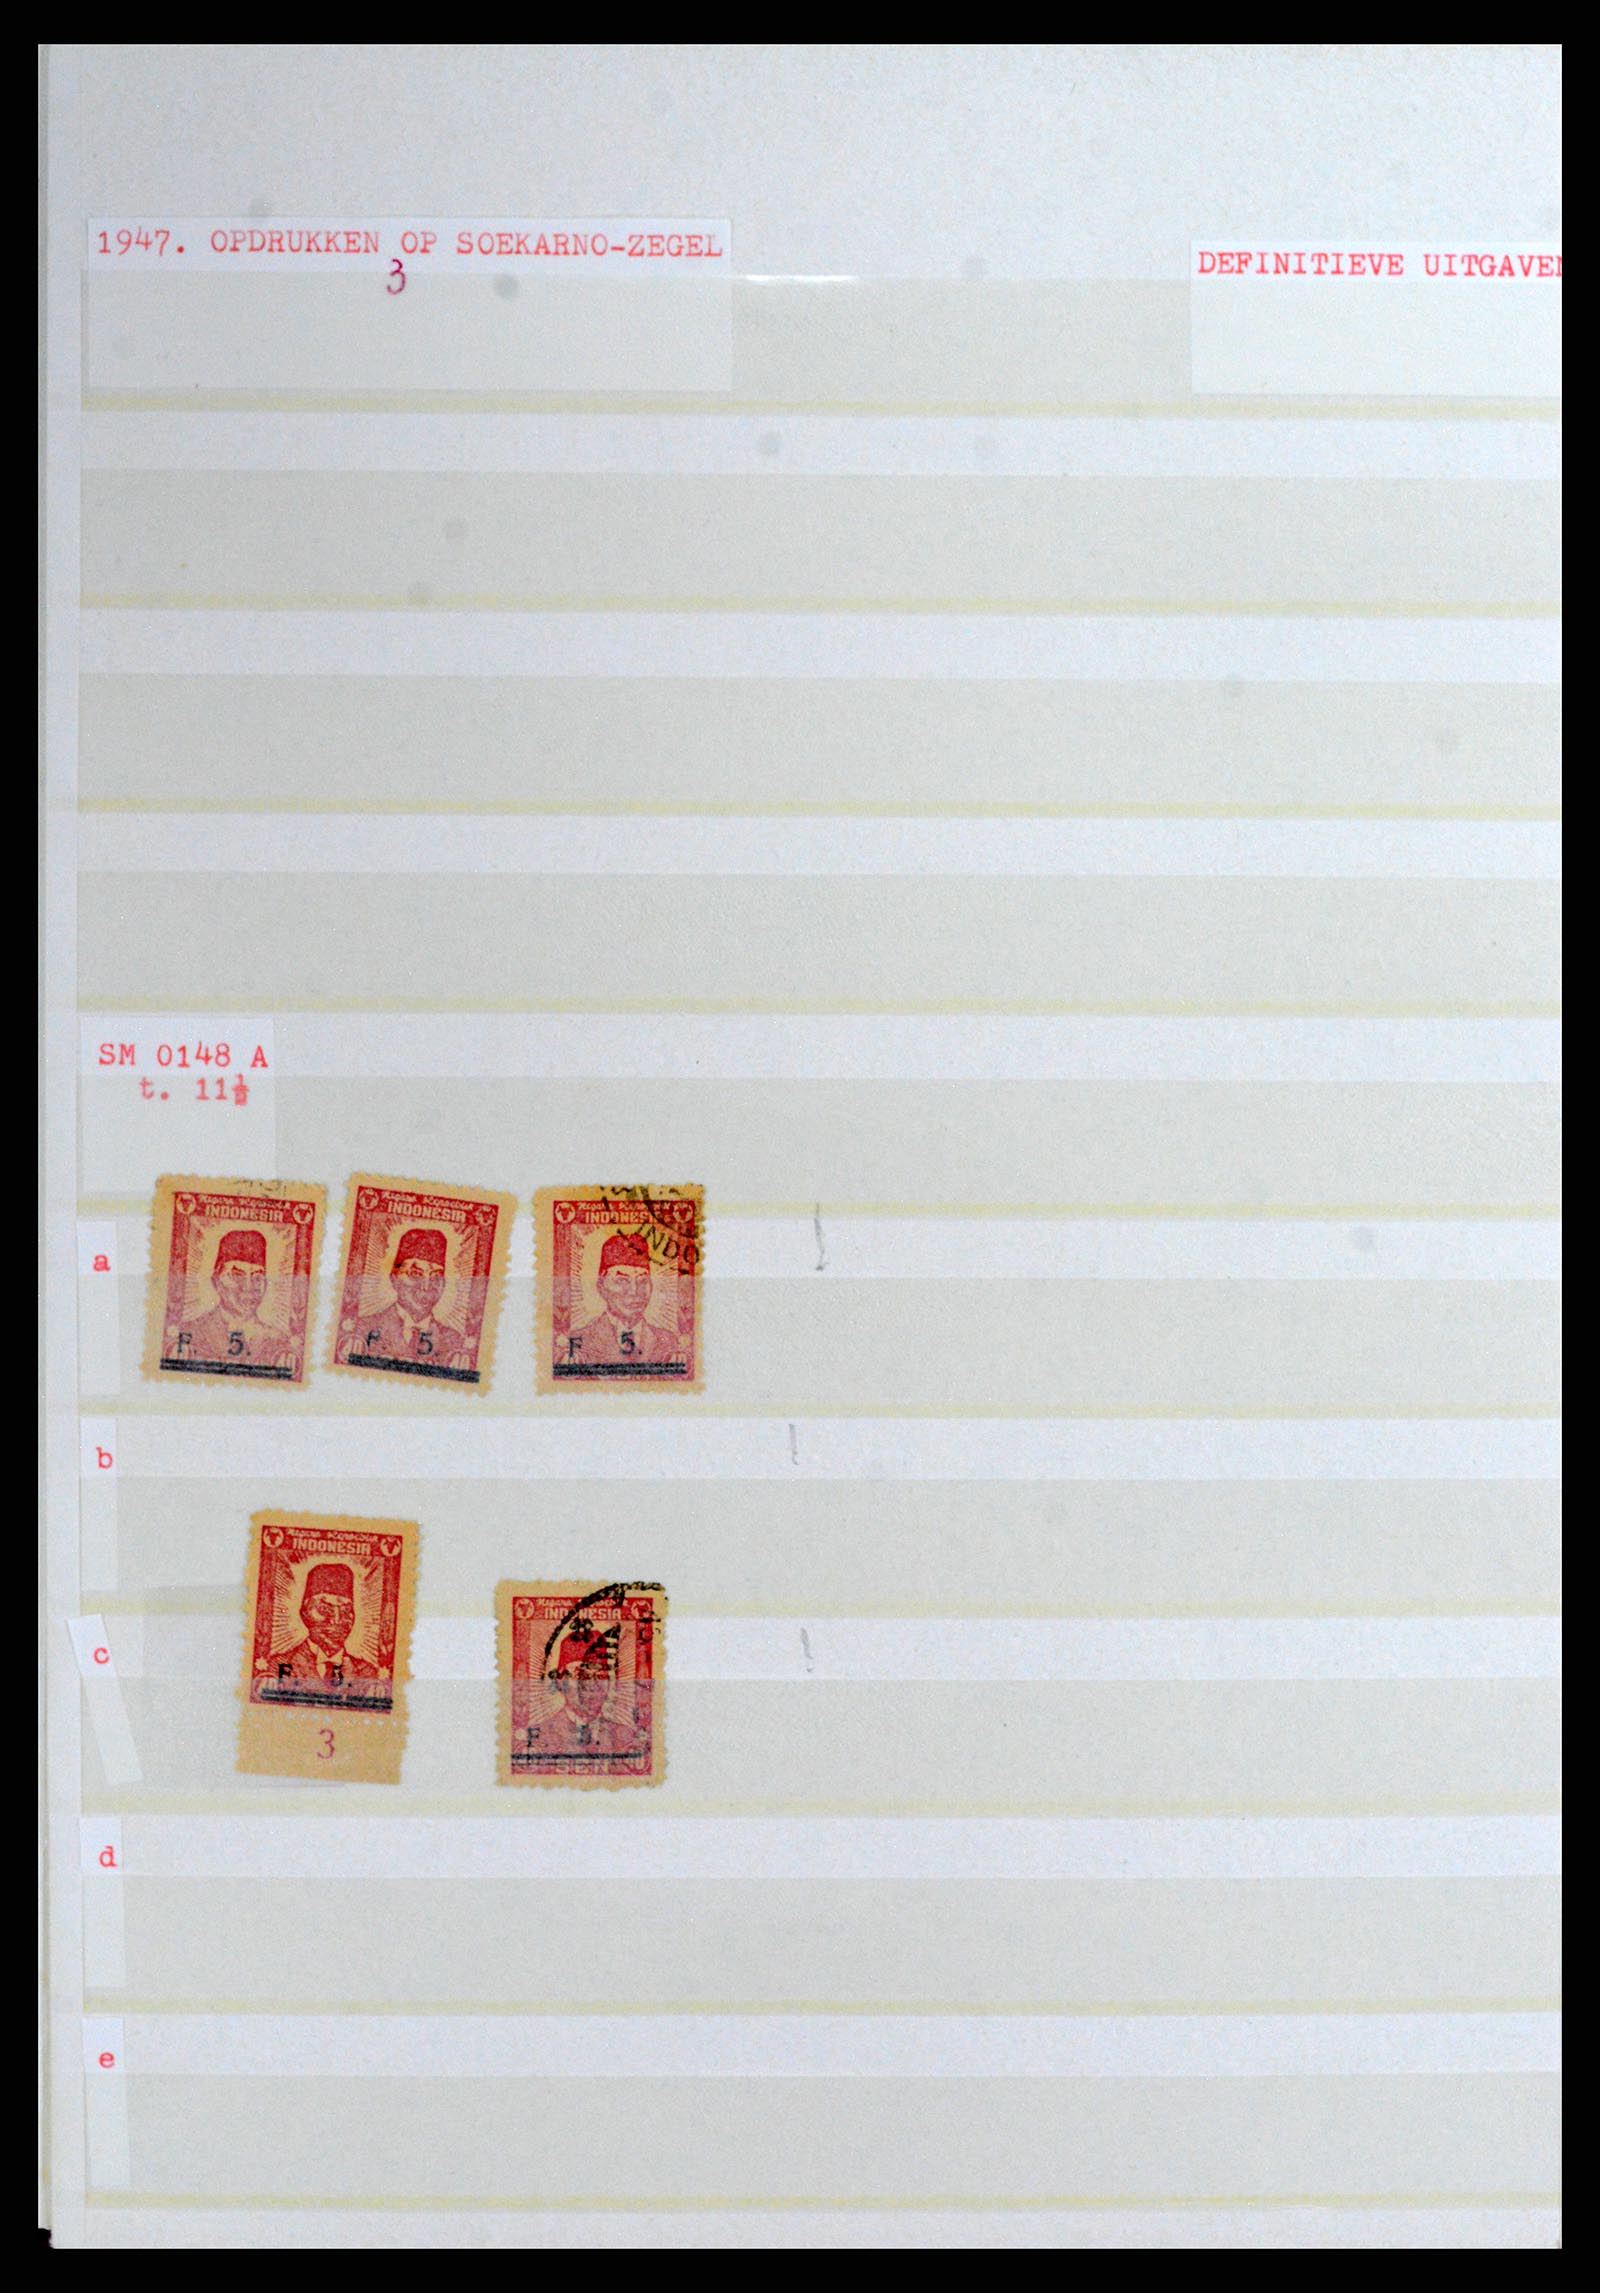 37692 133 - Stamp collection 37692 Indonesia interimperiod 1945-1499.